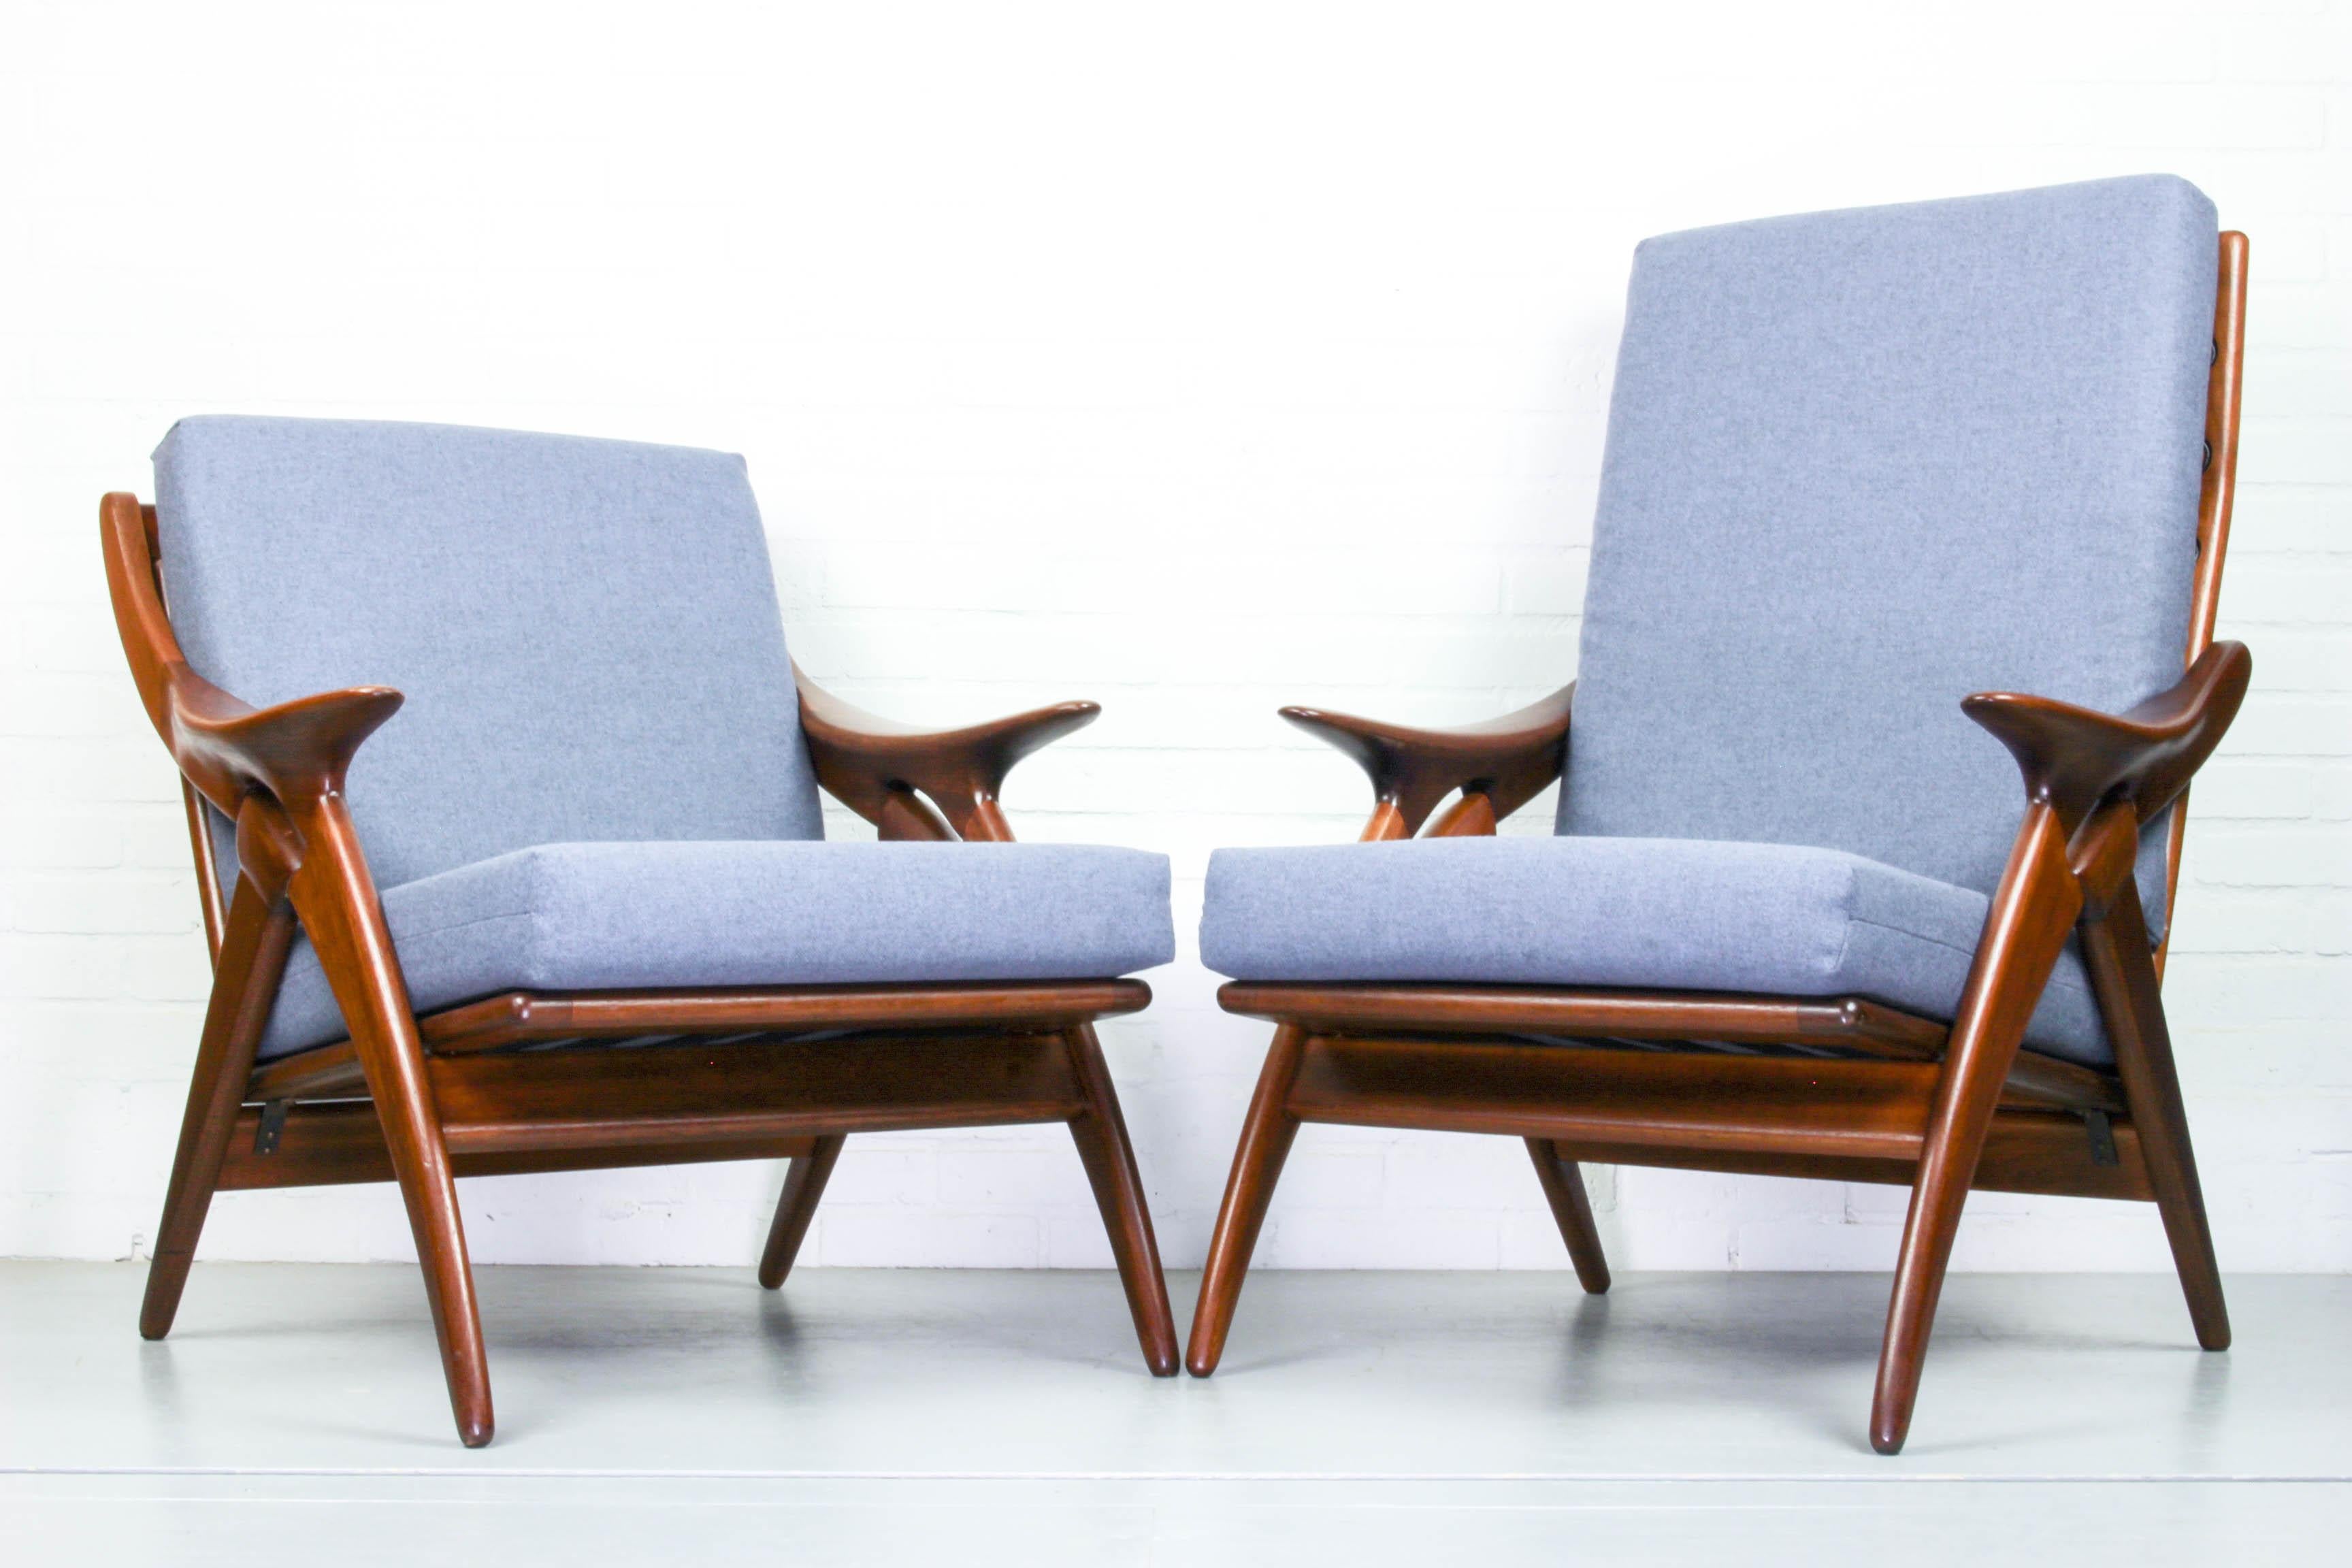 This set of teak armchair (the Knot) was made by De Ster Gelderland in the 1960s. The teak frames have organic designs with a detail shaped like a knot. The chair have new blue/grey upholstery. Dimensions: 71cm W, 80cm D, 78cm H (ladies chair) and